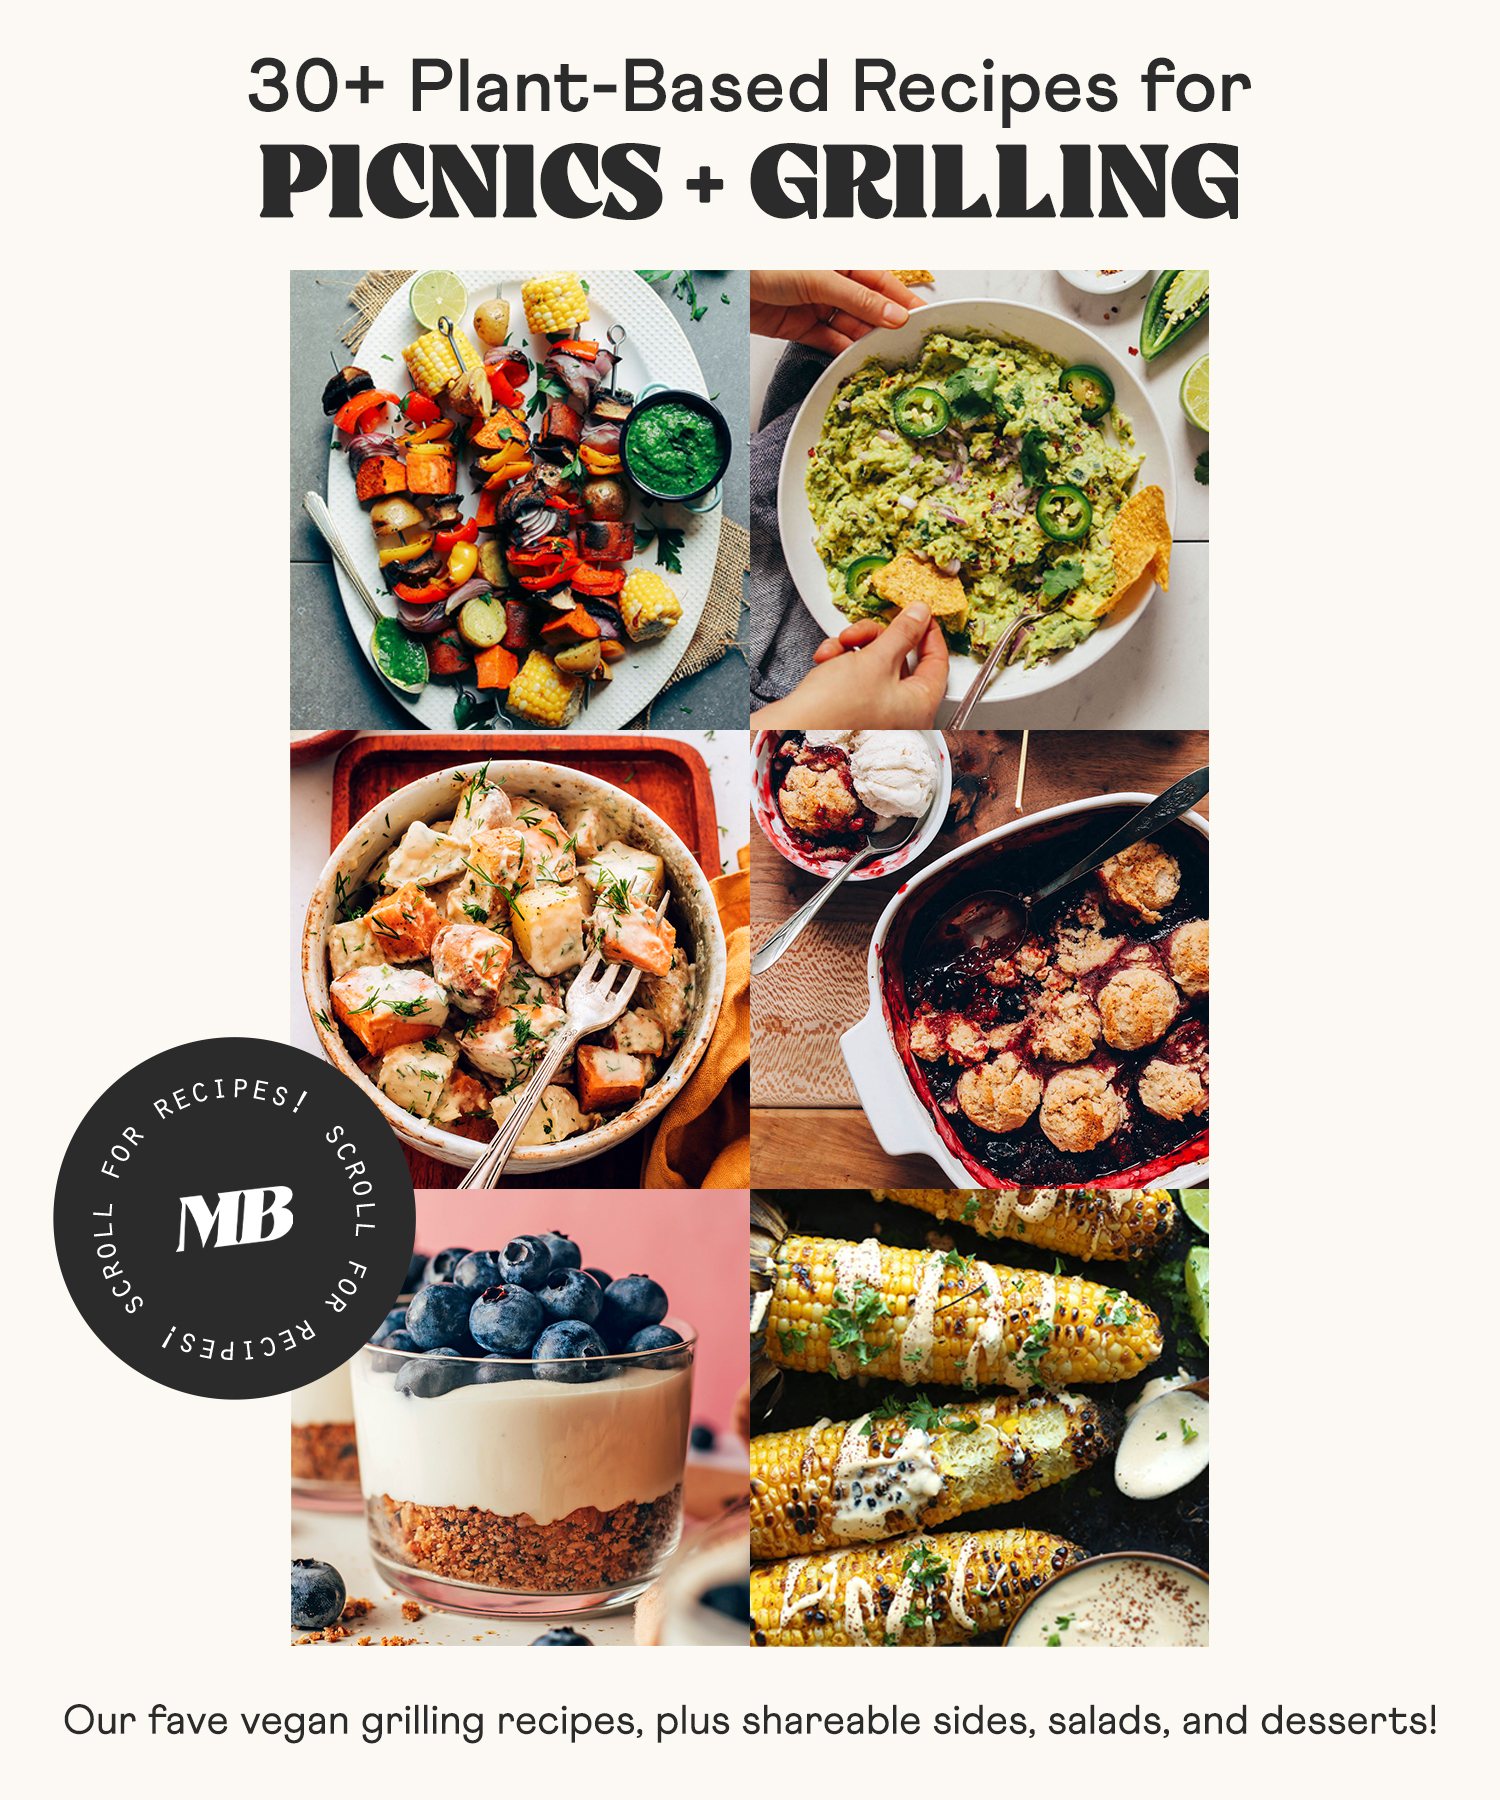 Illustrations of plant-based recipes for picnics and grilling